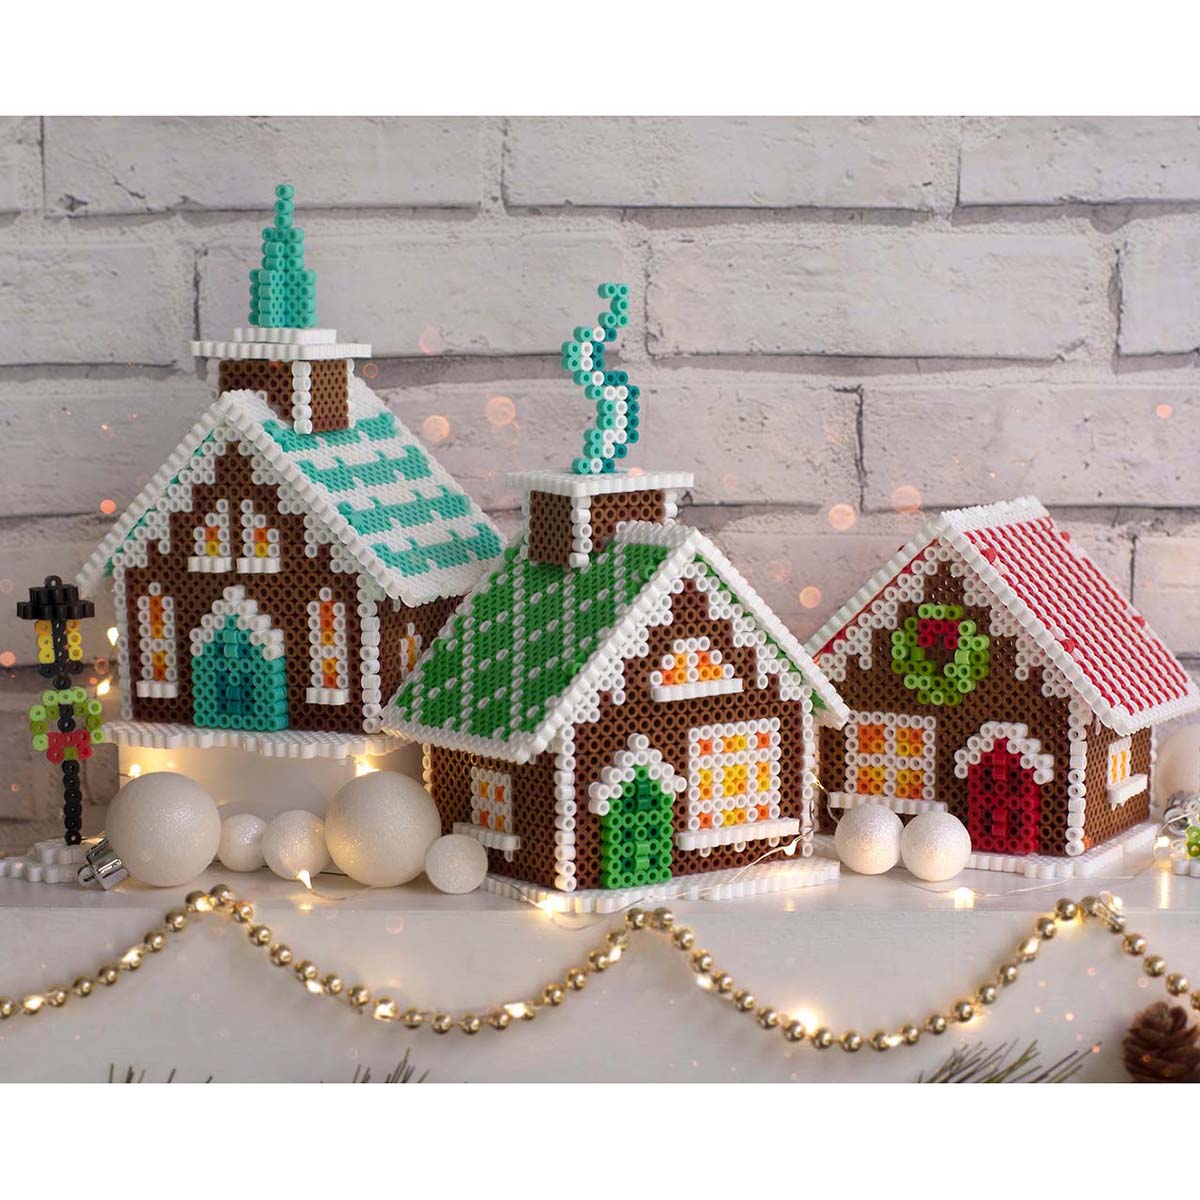 Perler Fused Bead Kit - 3D Holiday Gingerbread Village – Chez